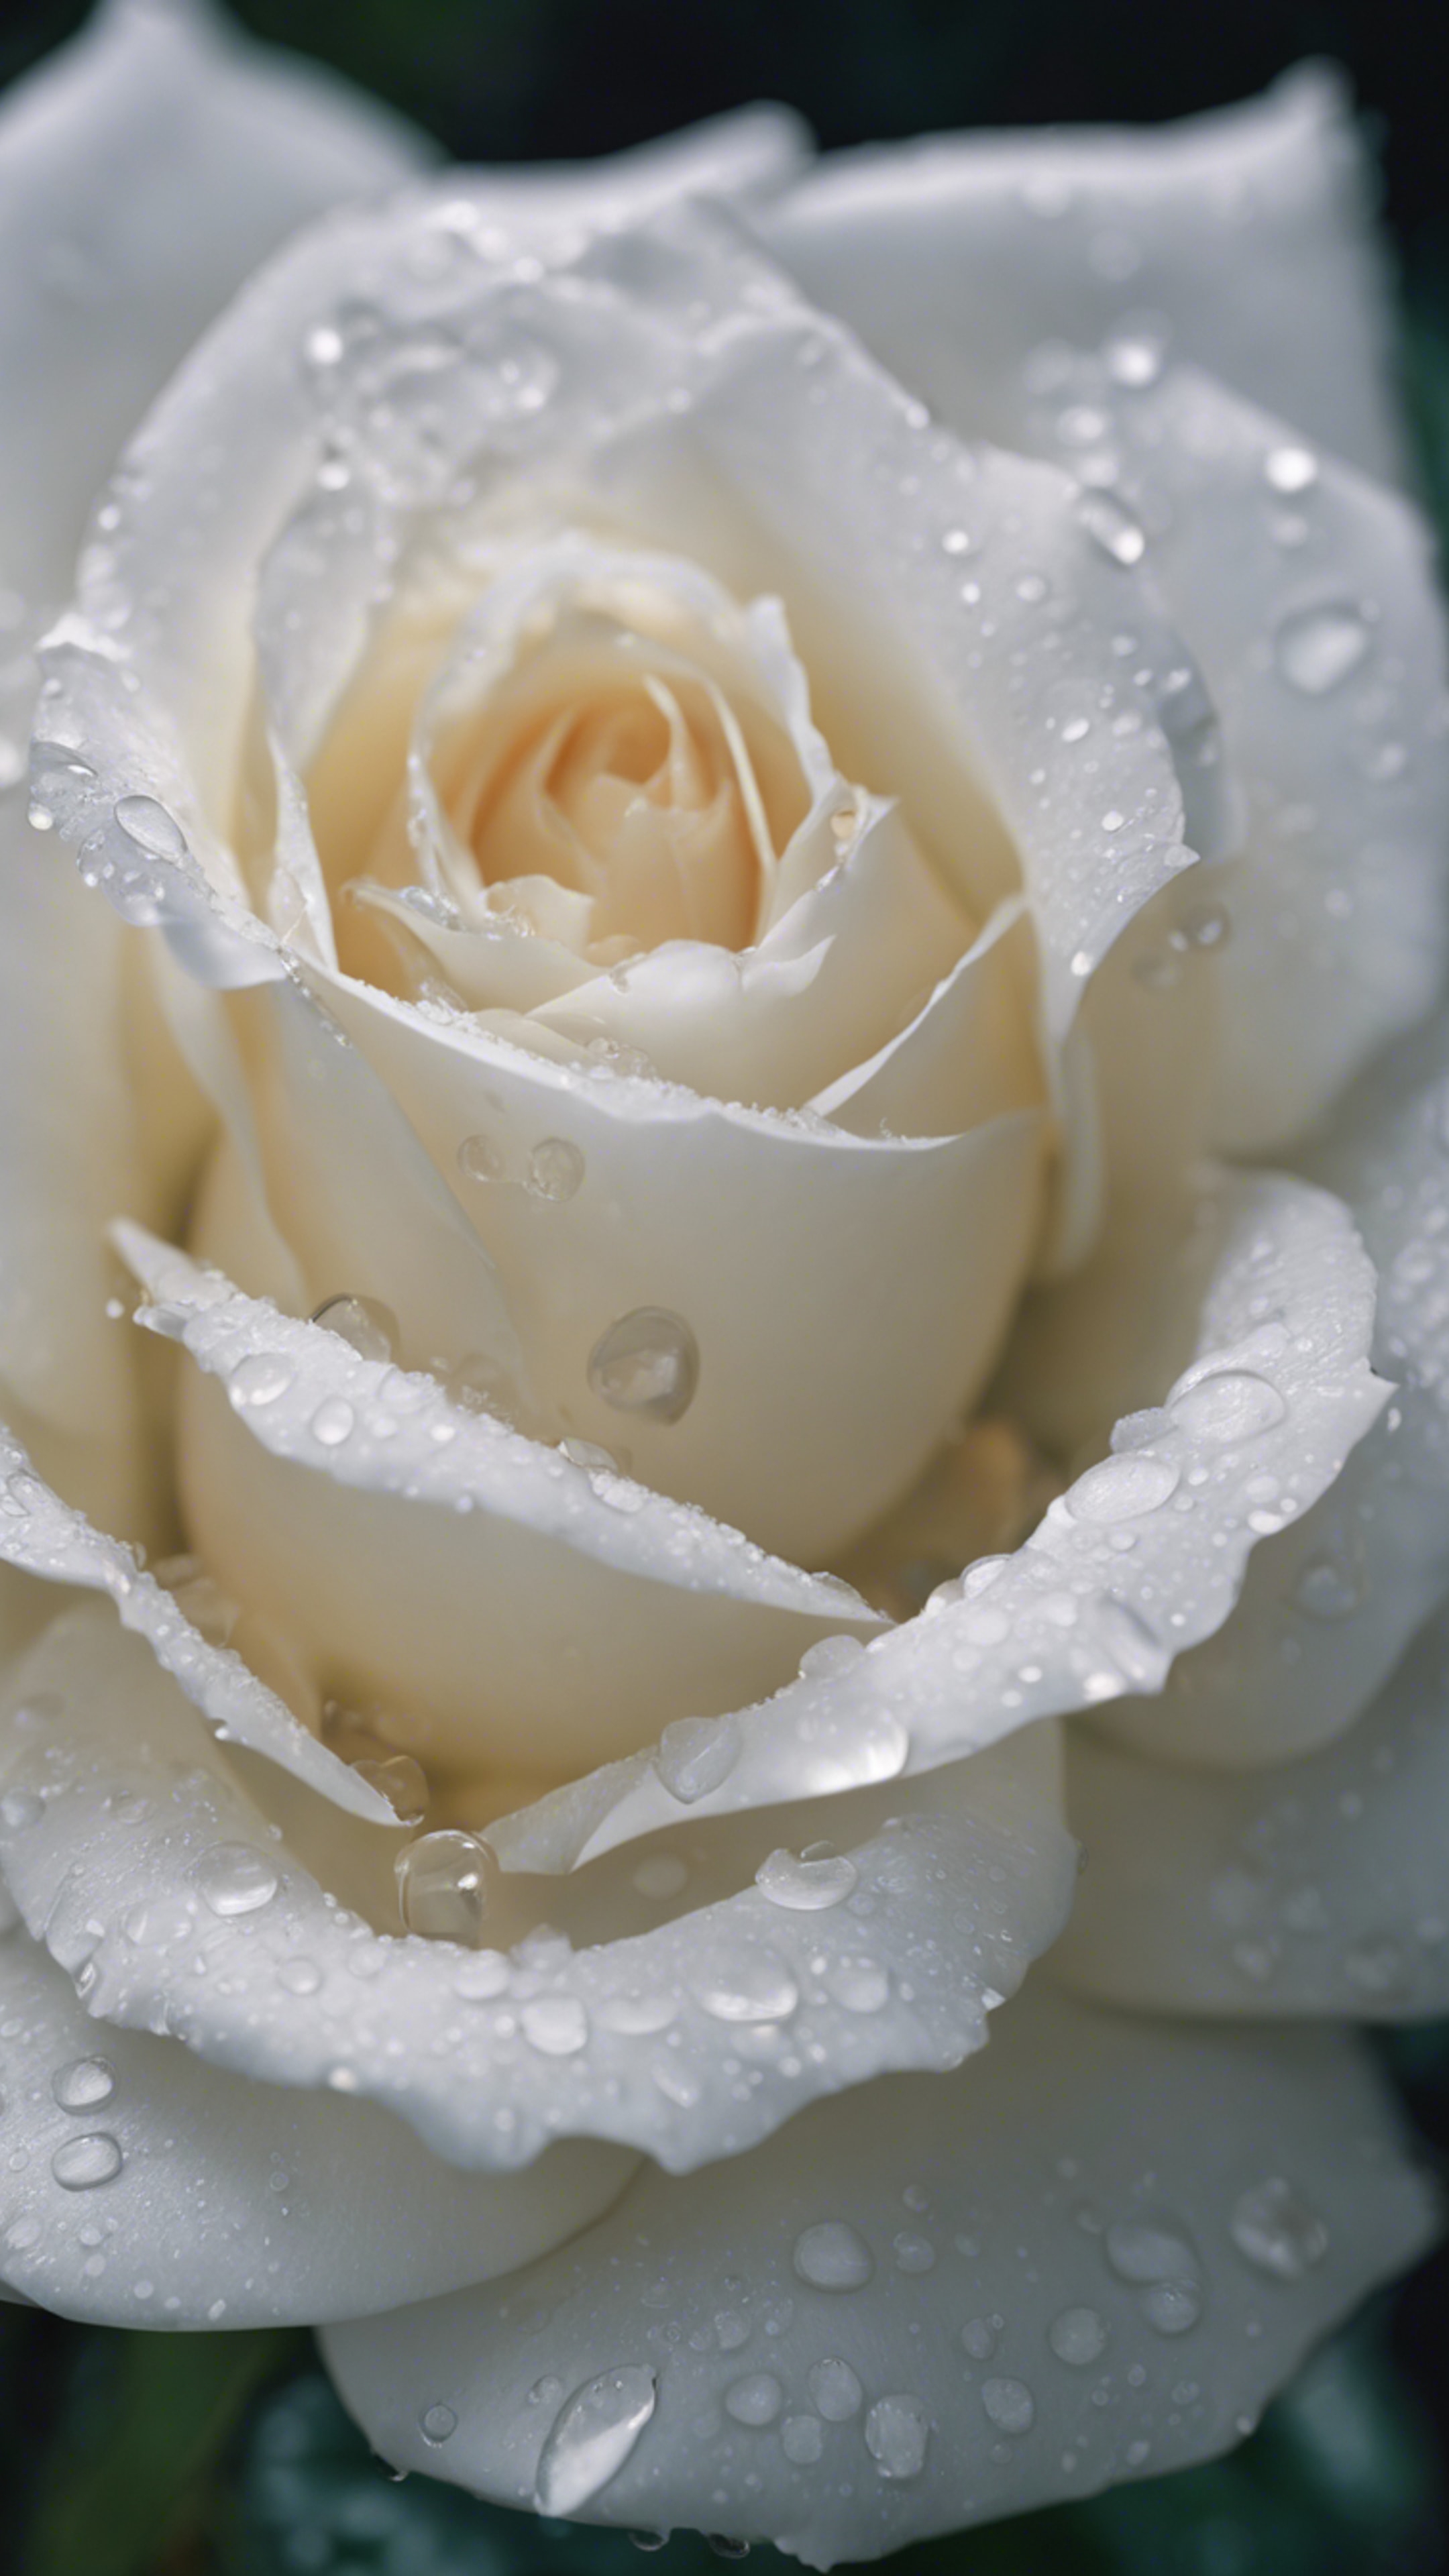 Close-up of a white rose in full bloom, a droplet of water hanging off one petal. 墙纸[2daa22f287134494a68f]